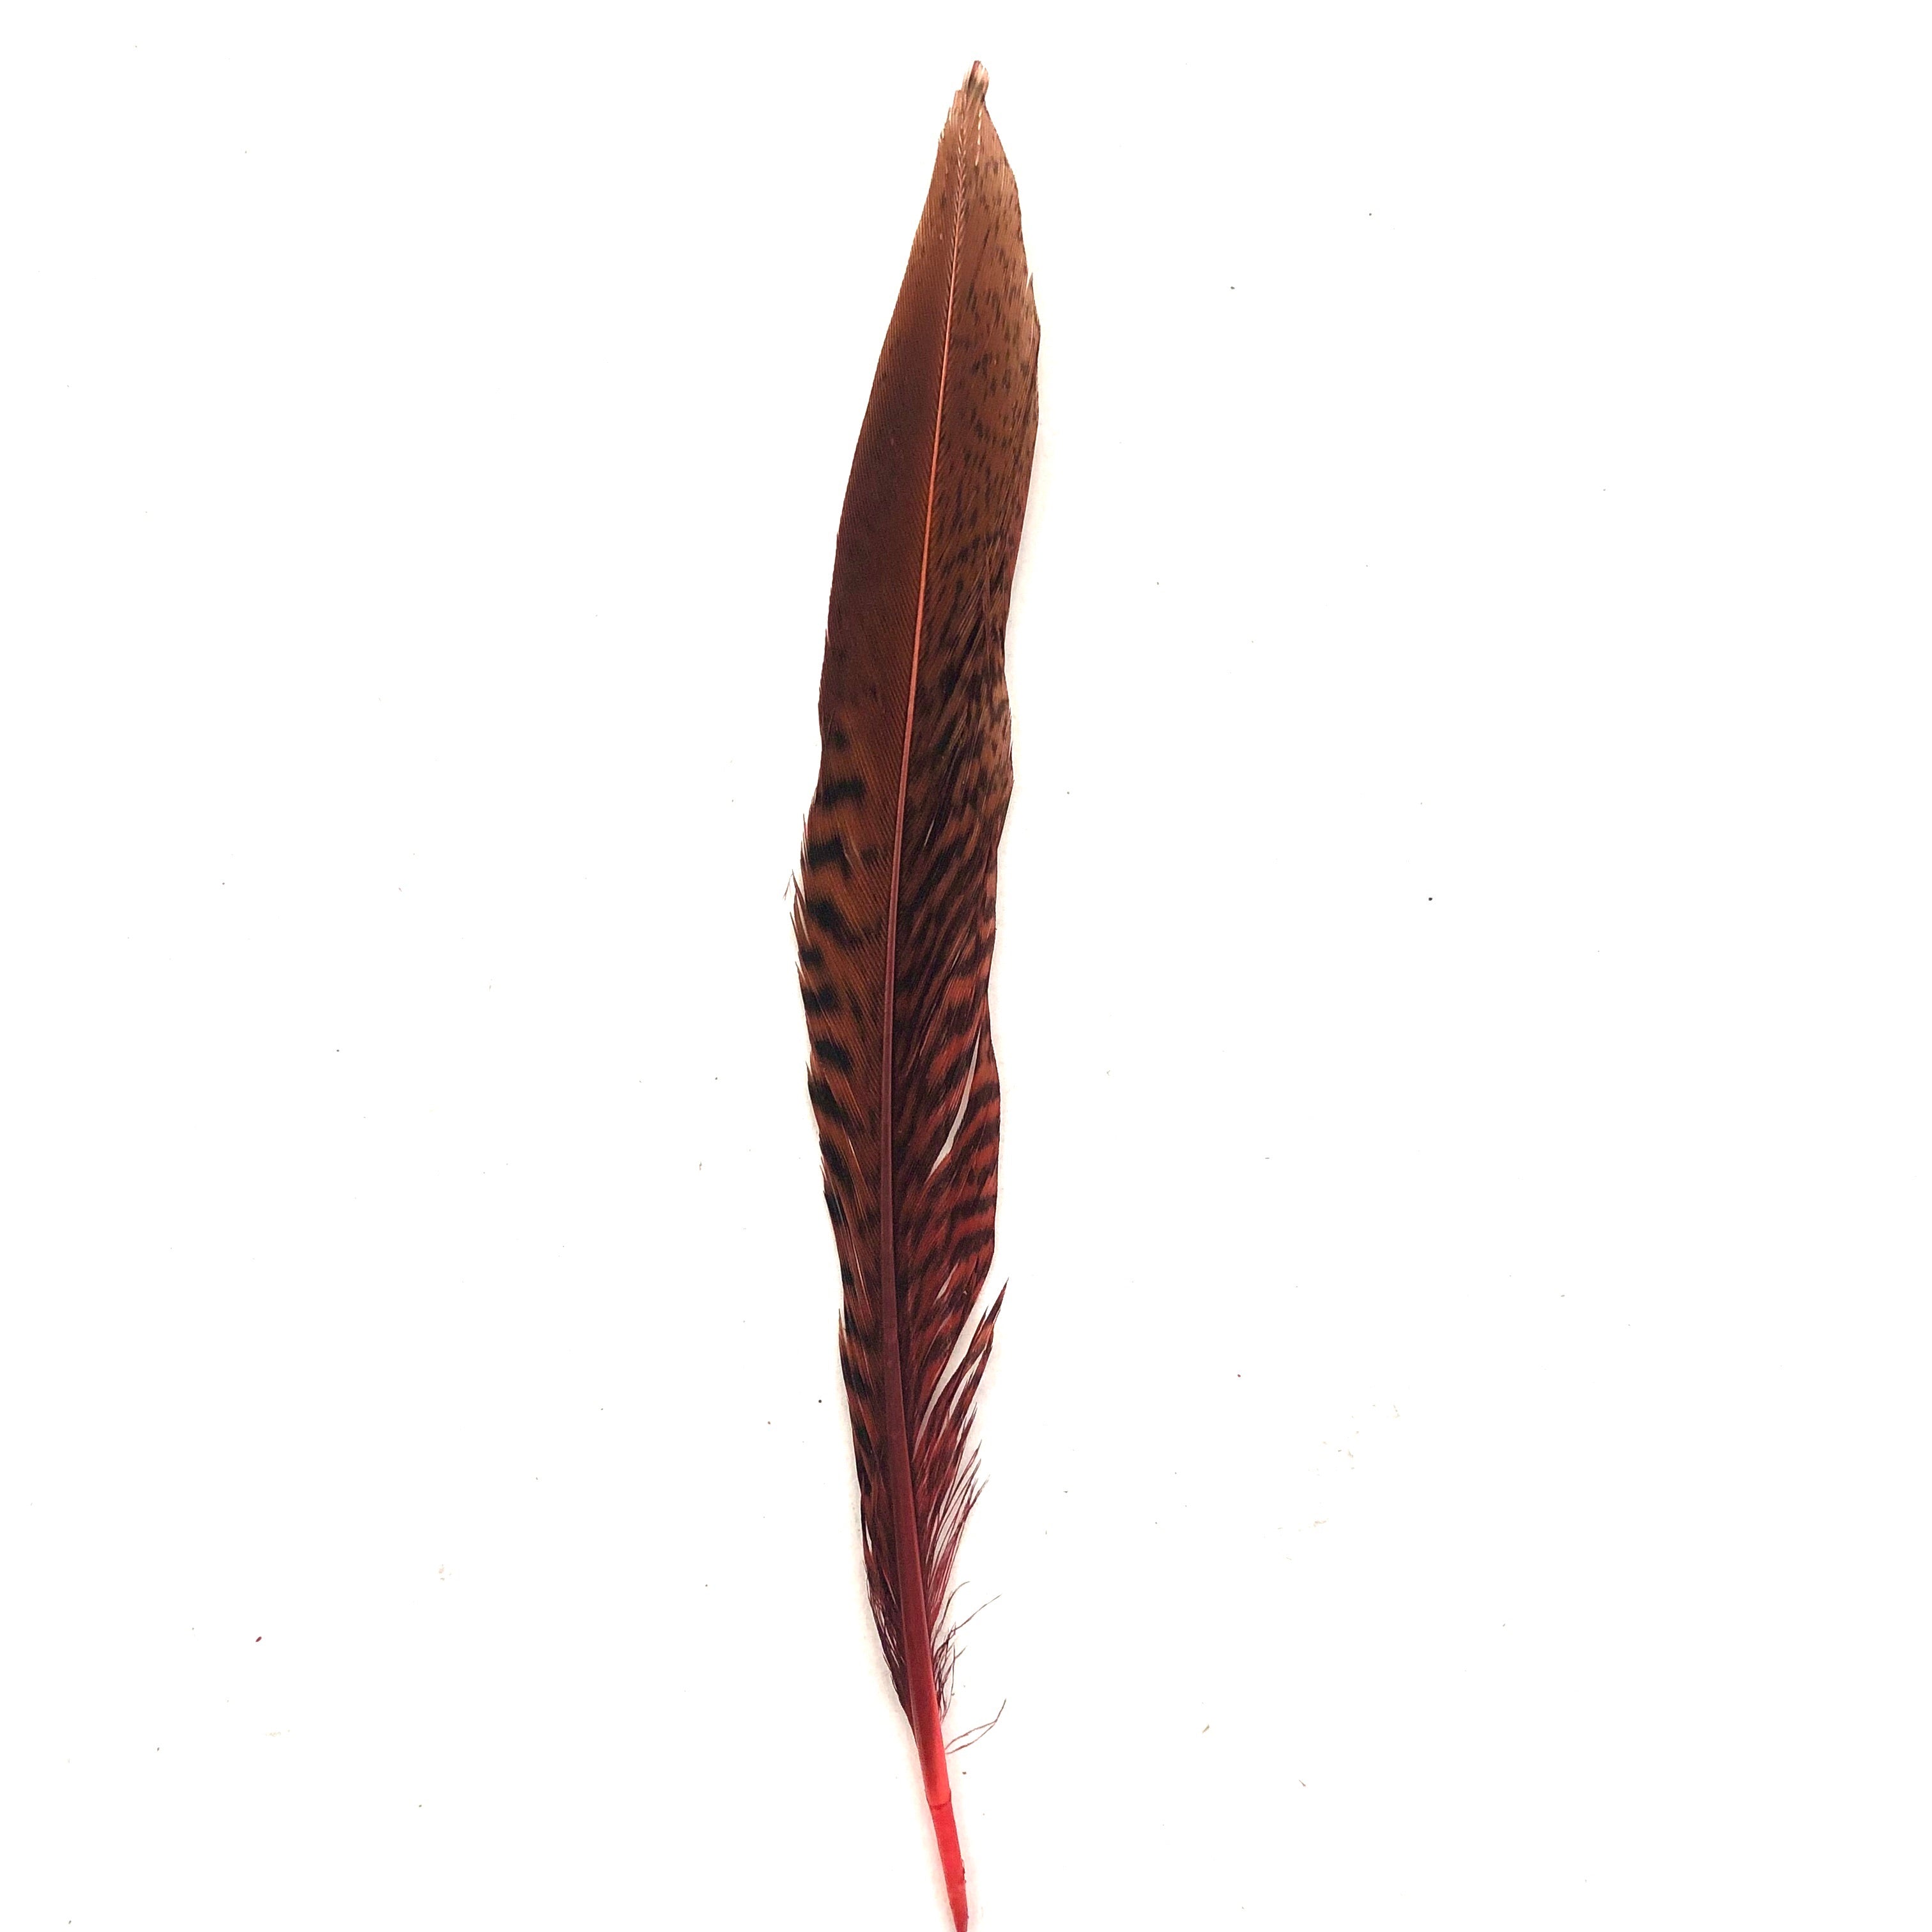 Under 6" Golden Pheasant Side Tail Feather x 10 pcs - Dusty Pink